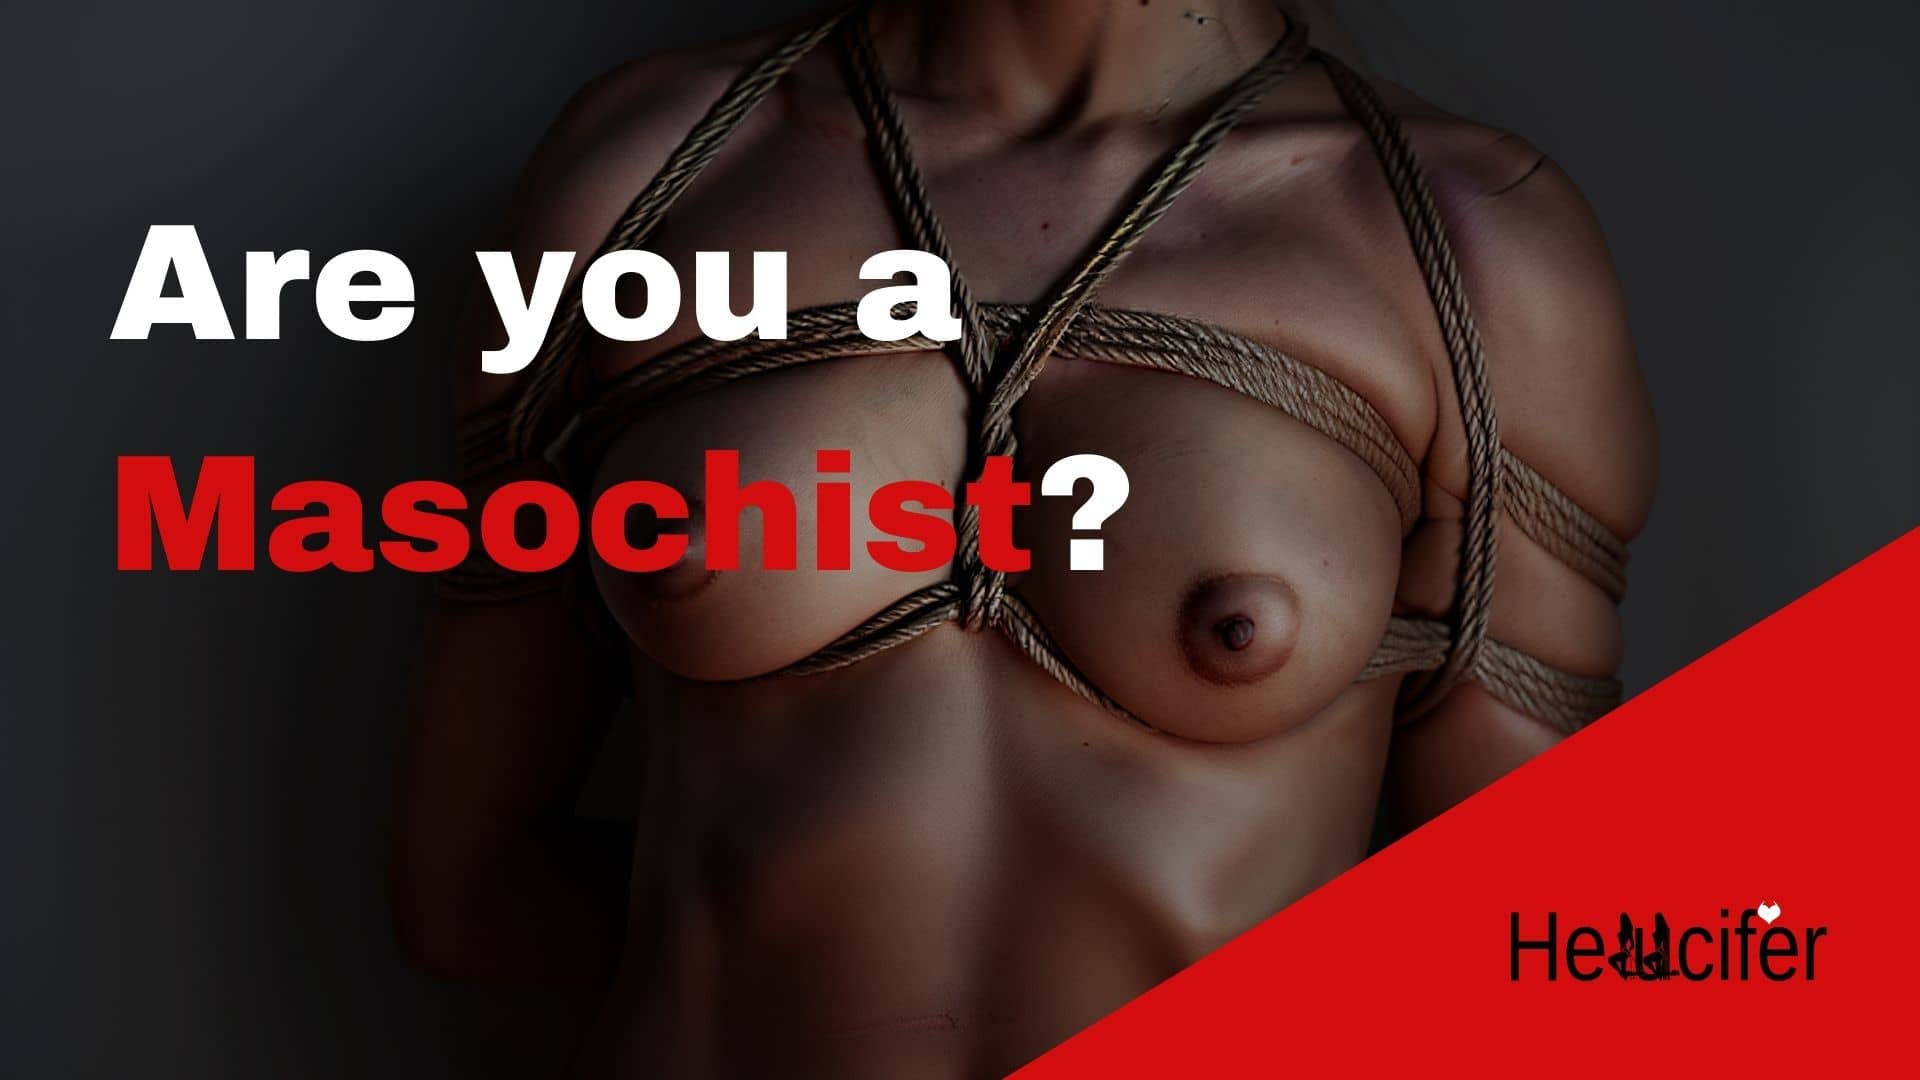 Are you a Masochist?